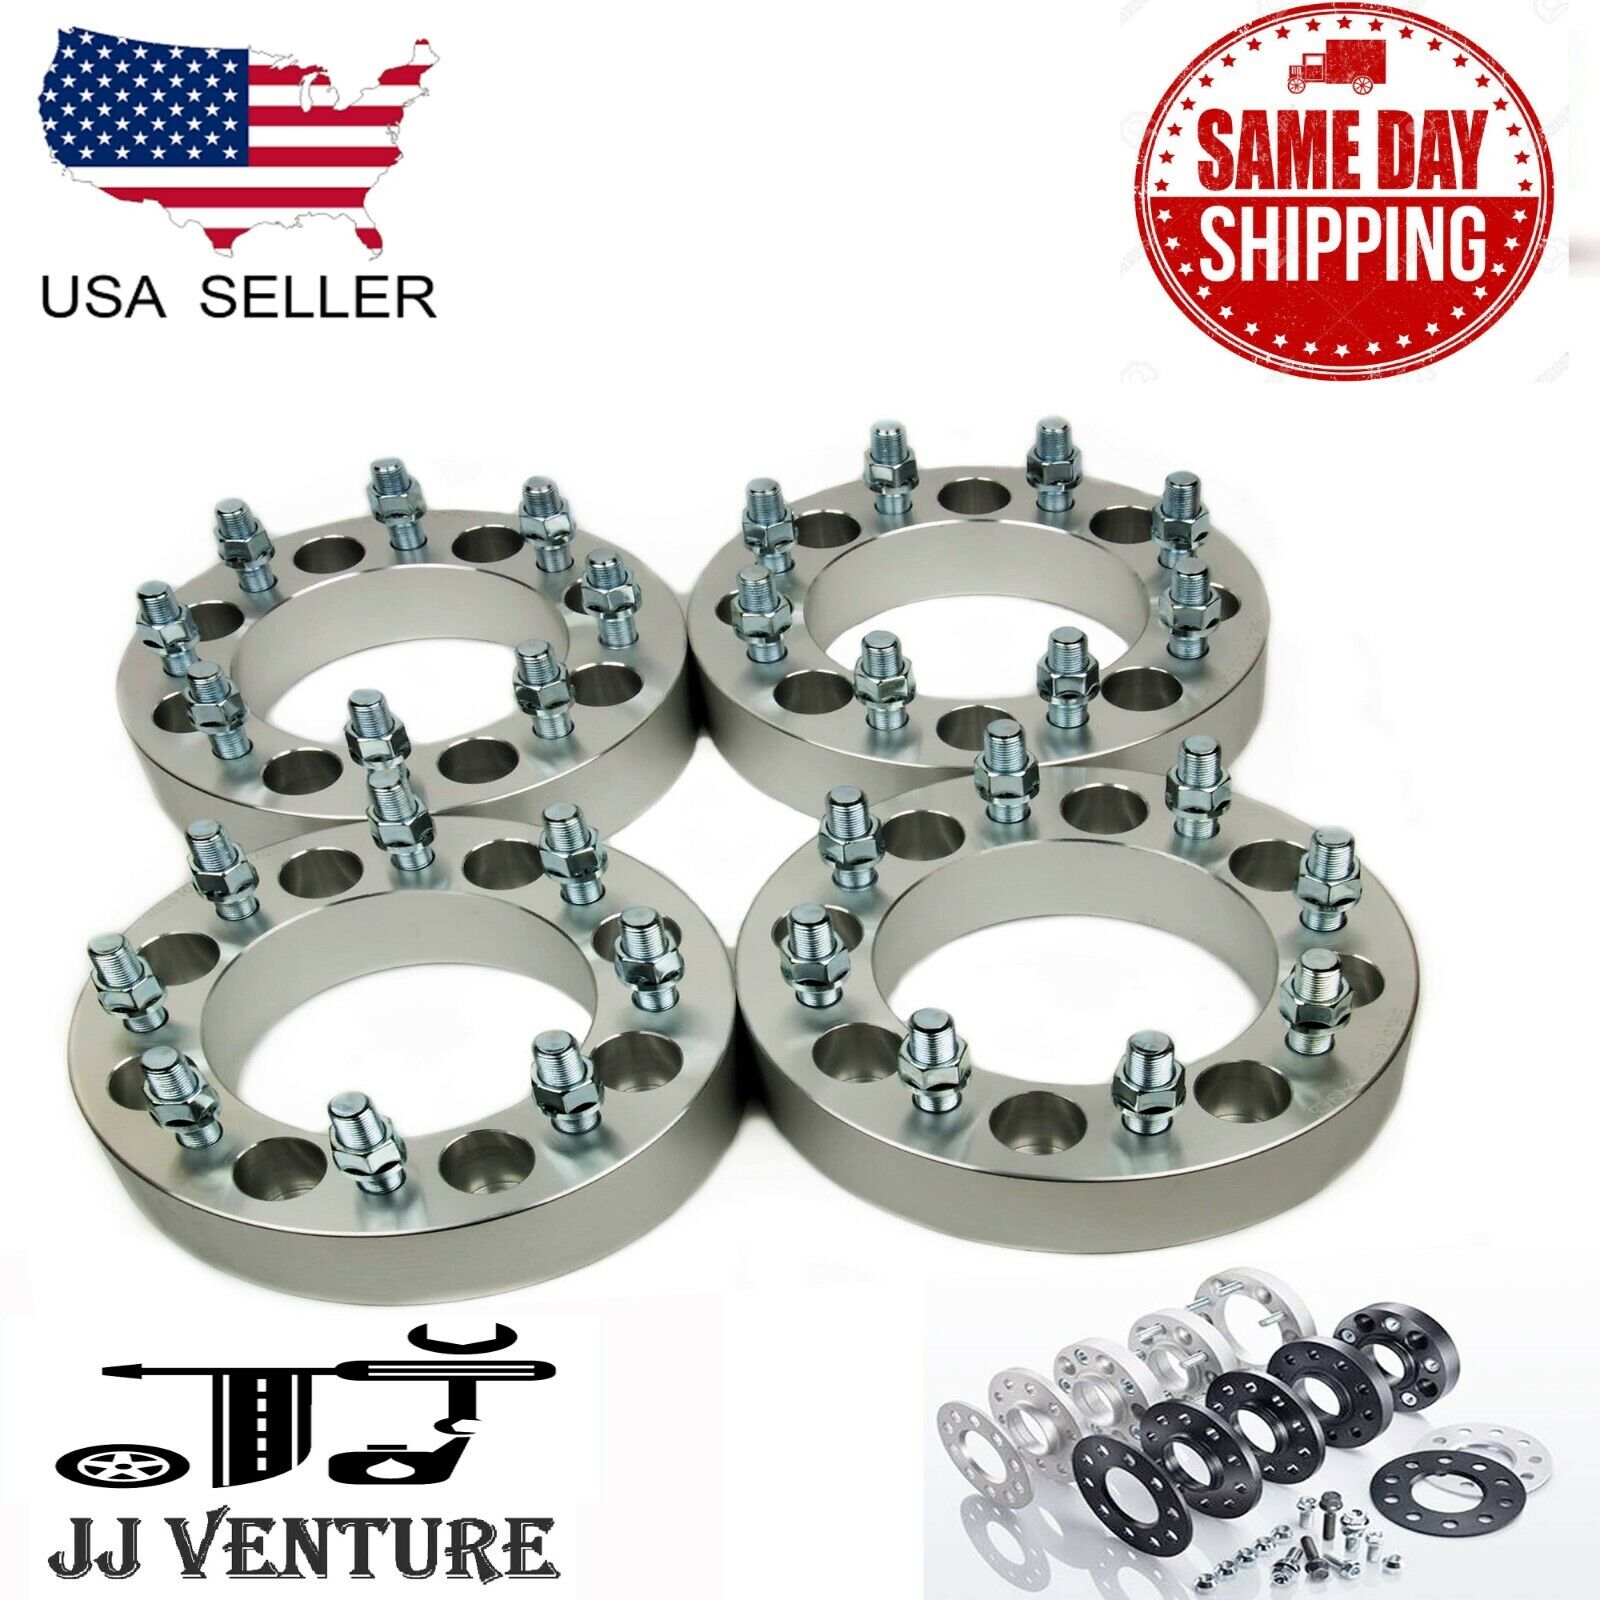 4PC 8X210 TO 8X210 WHEEL SPACERS ADAPTERS FIT SILVERADO SIERRA DUALLY 2\